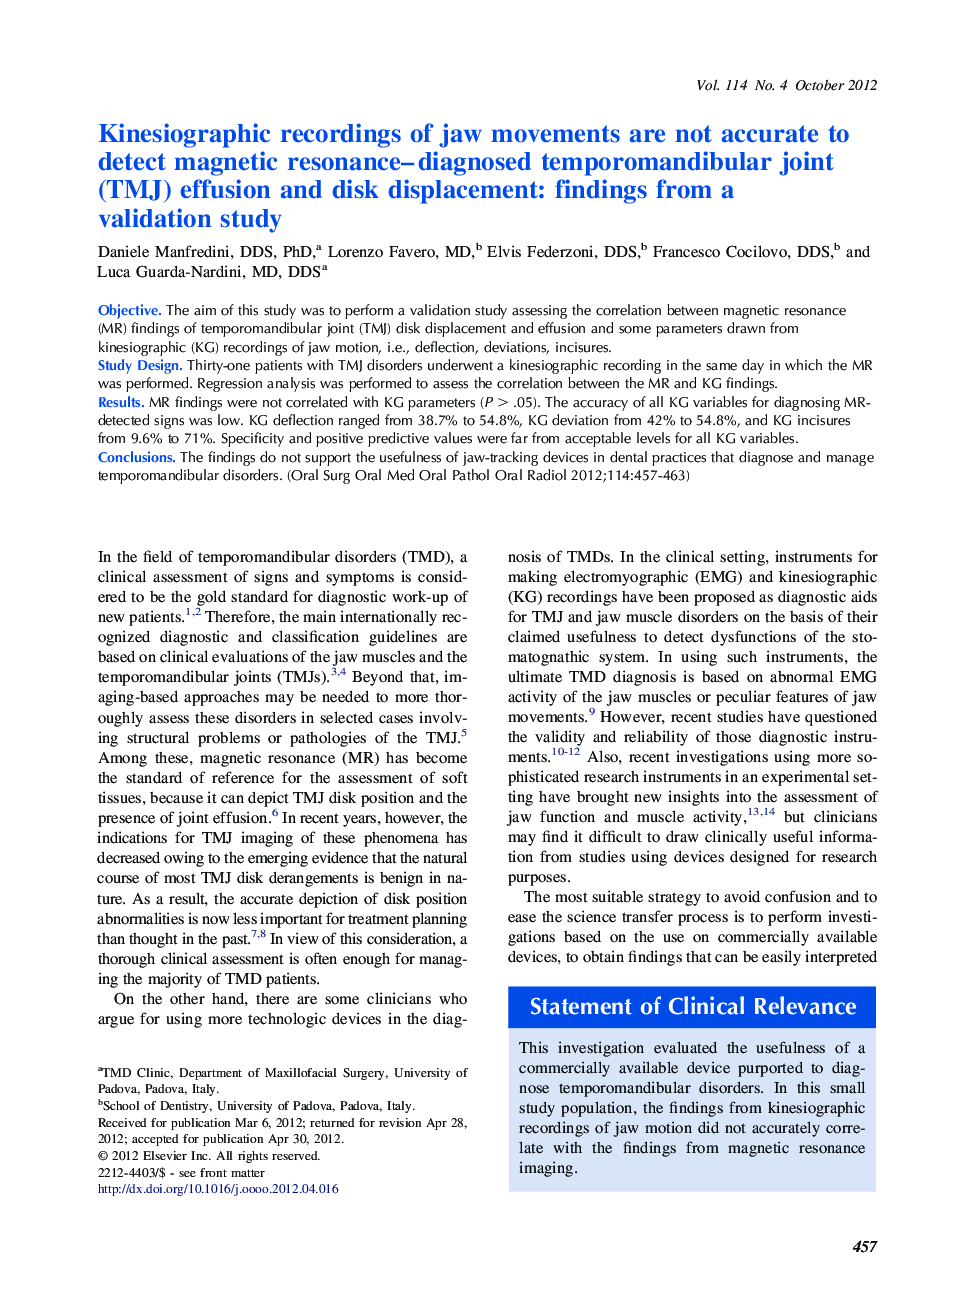 Kinesiographic recordings of jaw movements are not accurate to detect magnetic resonance-diagnosed temporomandibular joint (TMJ) effusion and disk displacement: findings from a validation study